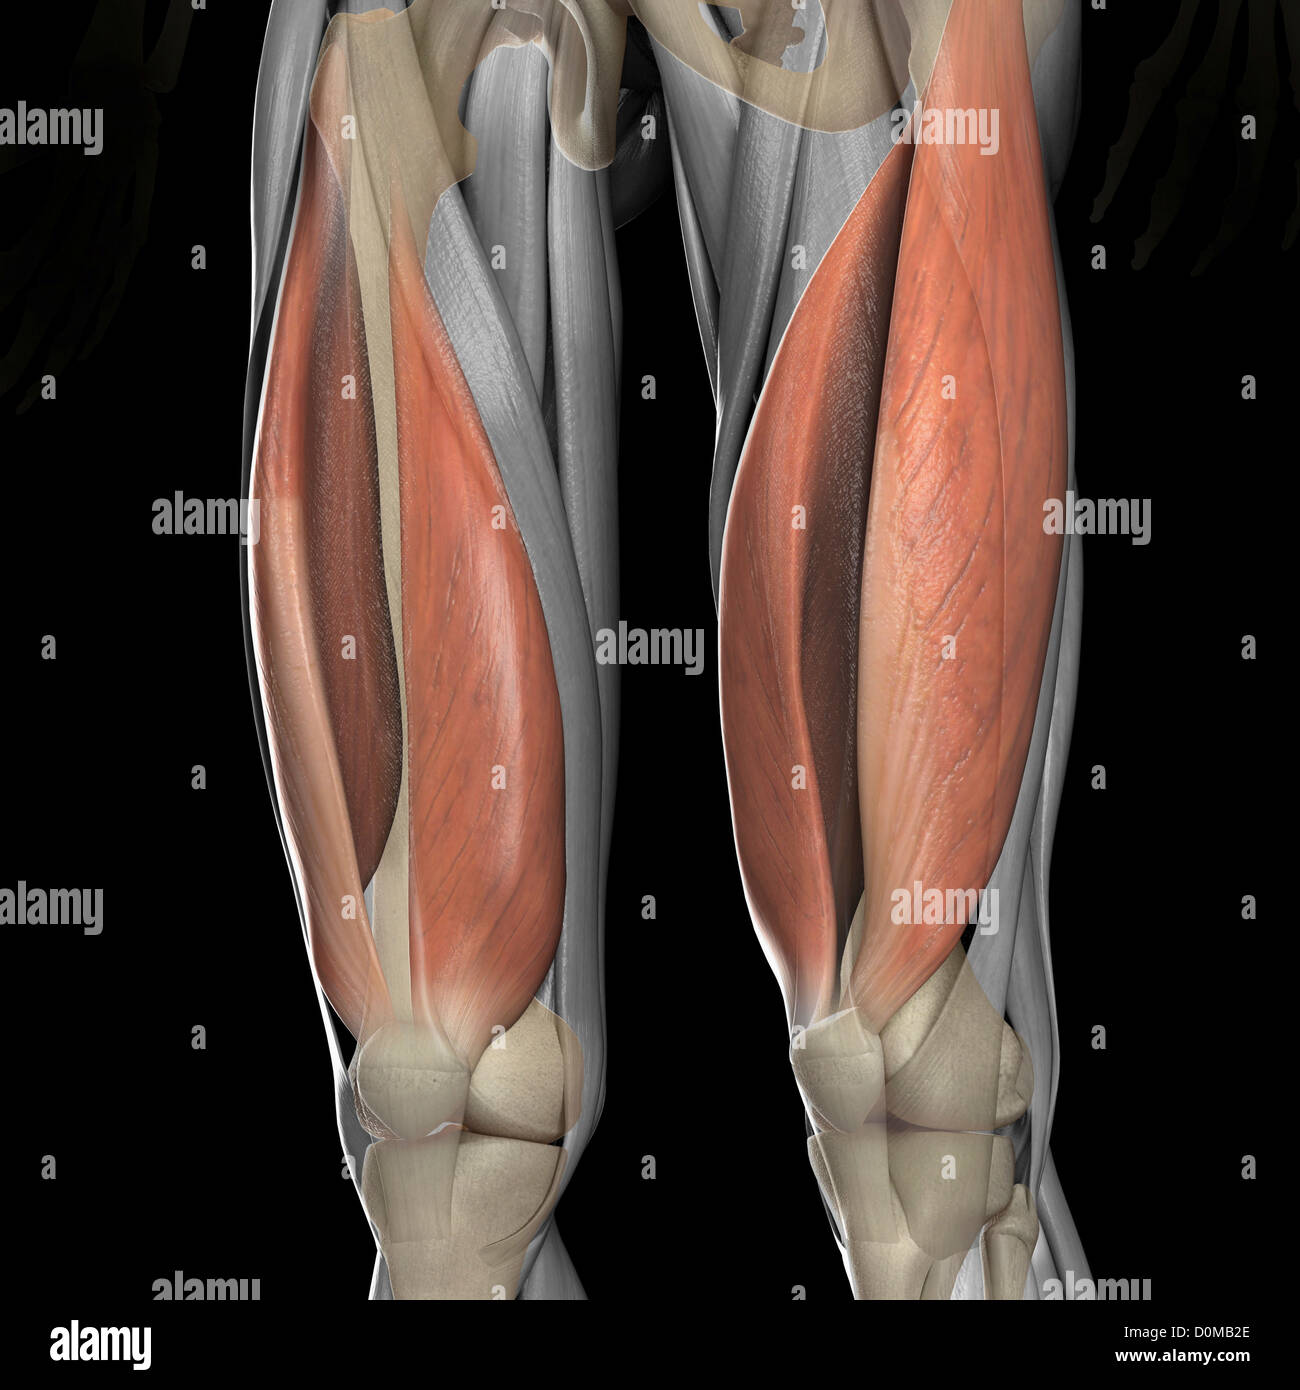 A human model showing the vastus medialis and lateralis muscles. Stock Photo